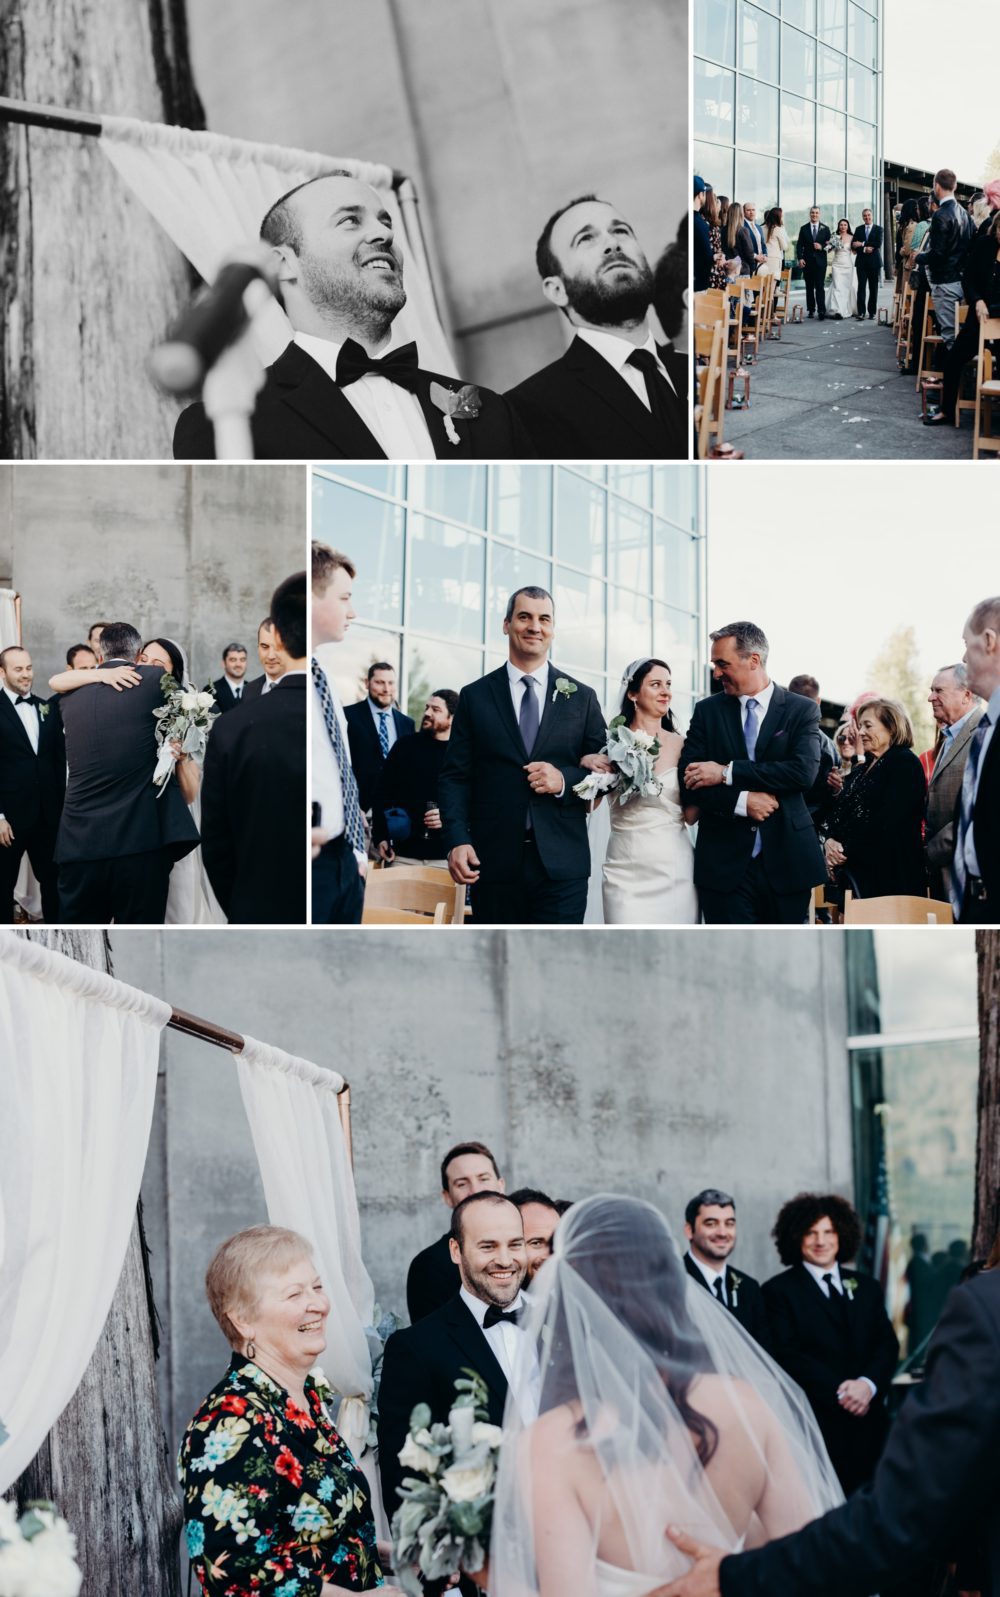 Here comes the bride!  Interpretive Center Museum wedding by Briana Morrison Photography